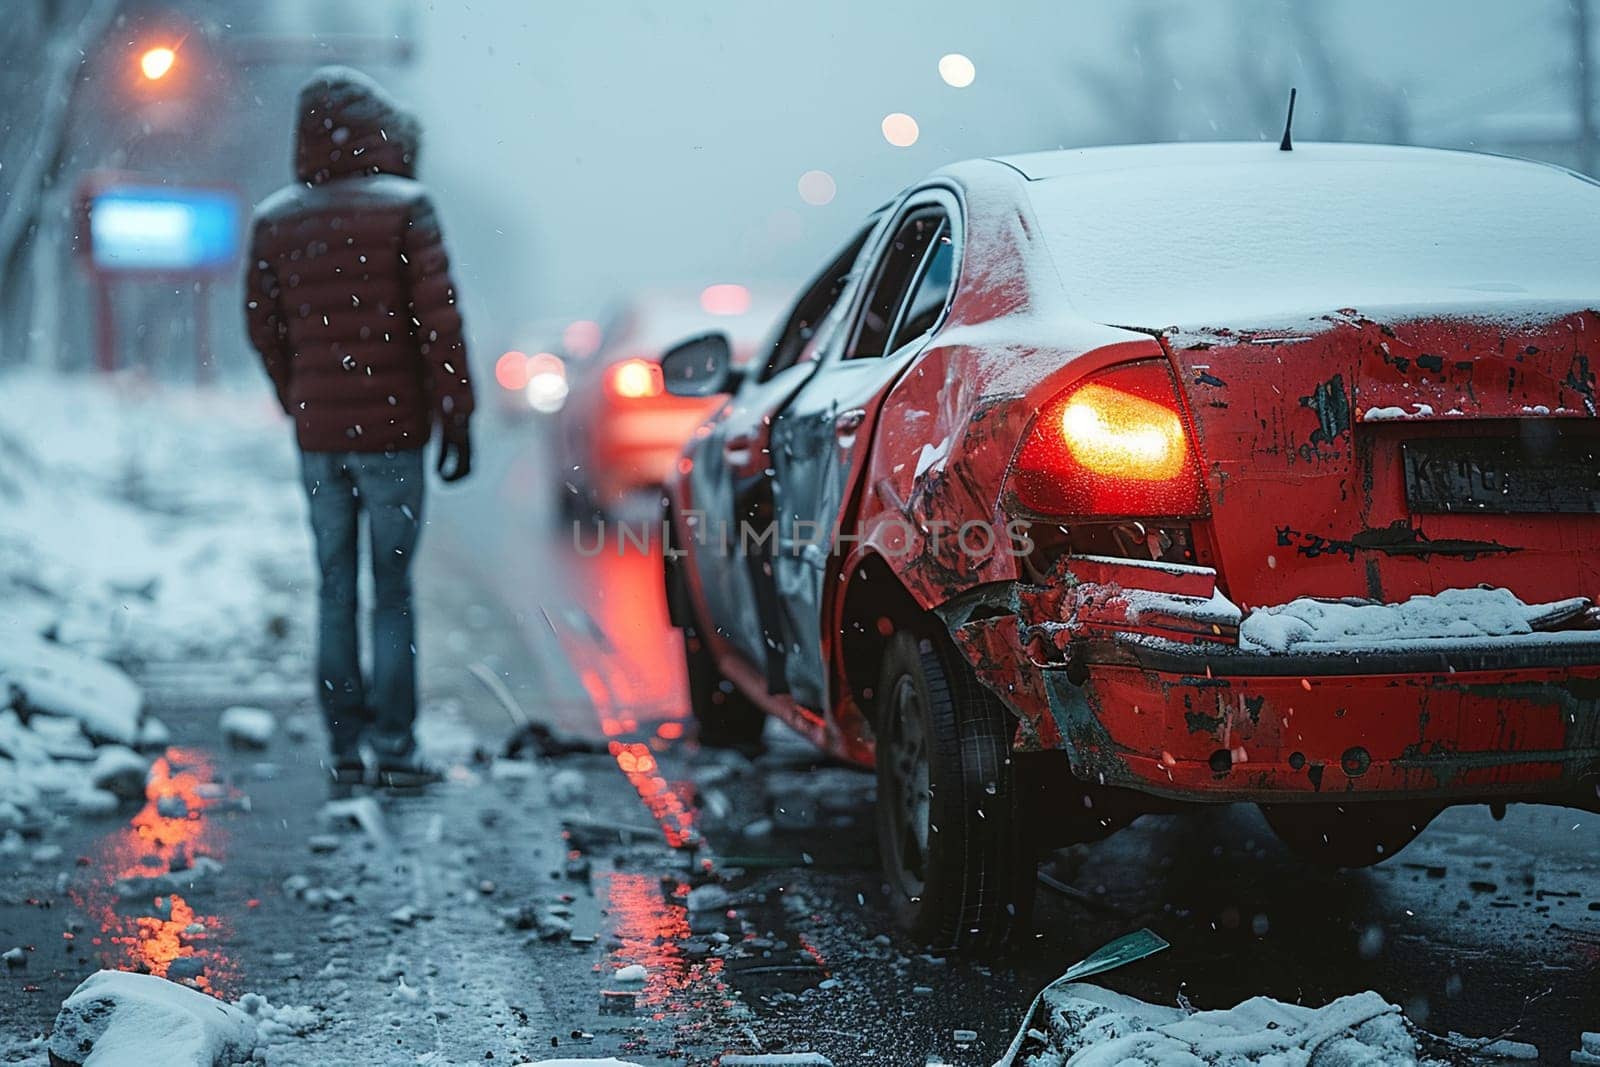 Winter evening captures red car rear damage due to accident, man walks away distressed, snowfall adds to cold, gloomy atmosphere